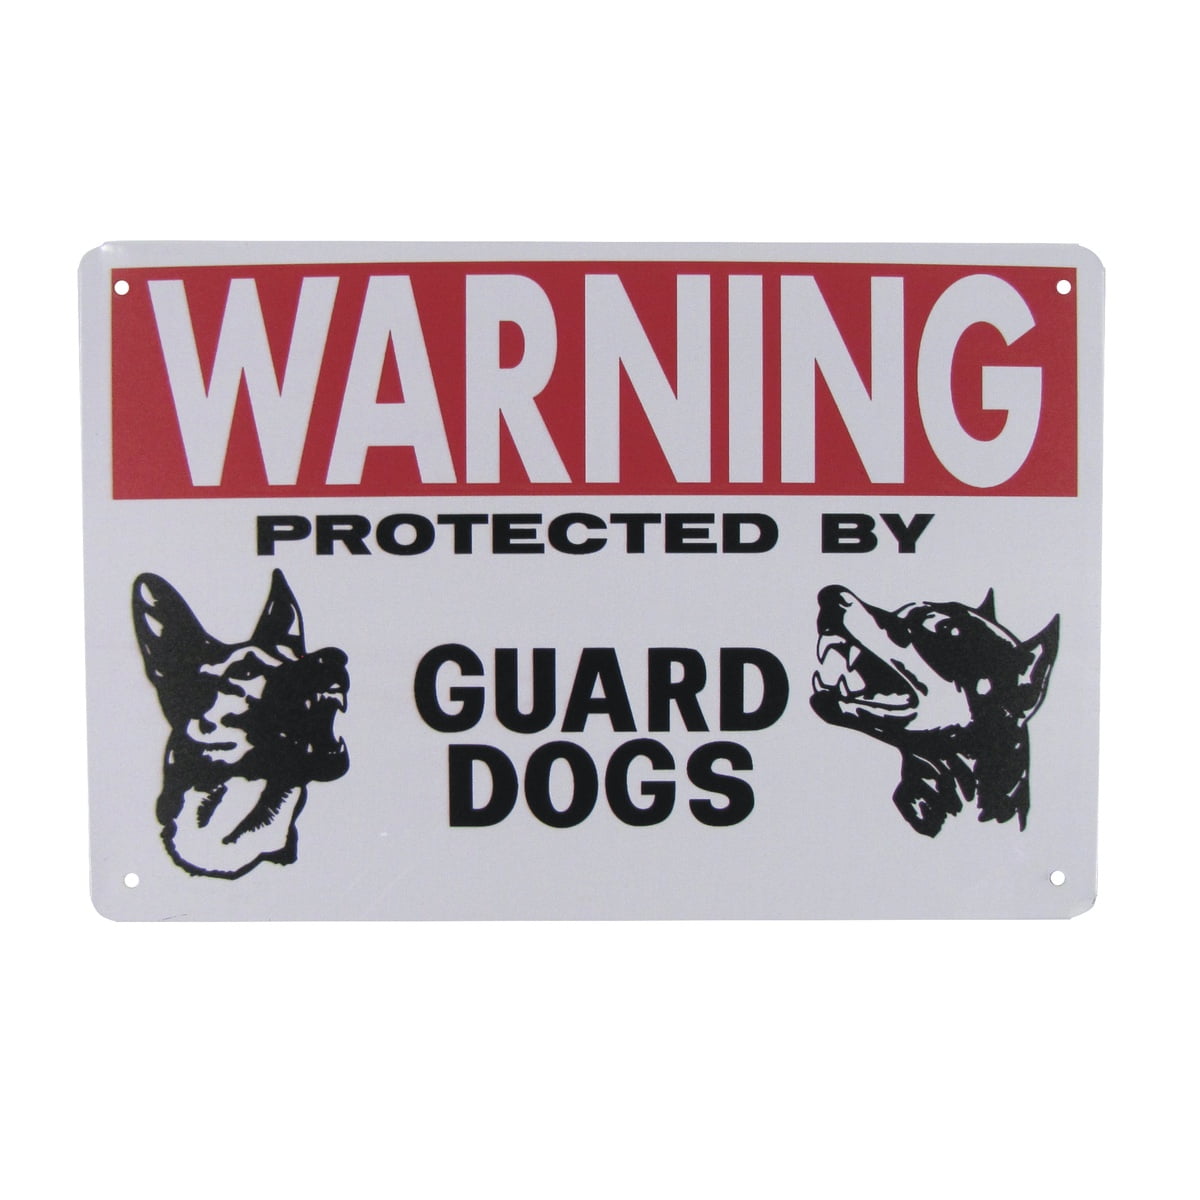 BEWARE OF THE BULLMASTIFF ENTER AT YOUR OWN RISK METAL SIGN,SECURITY SIGN 